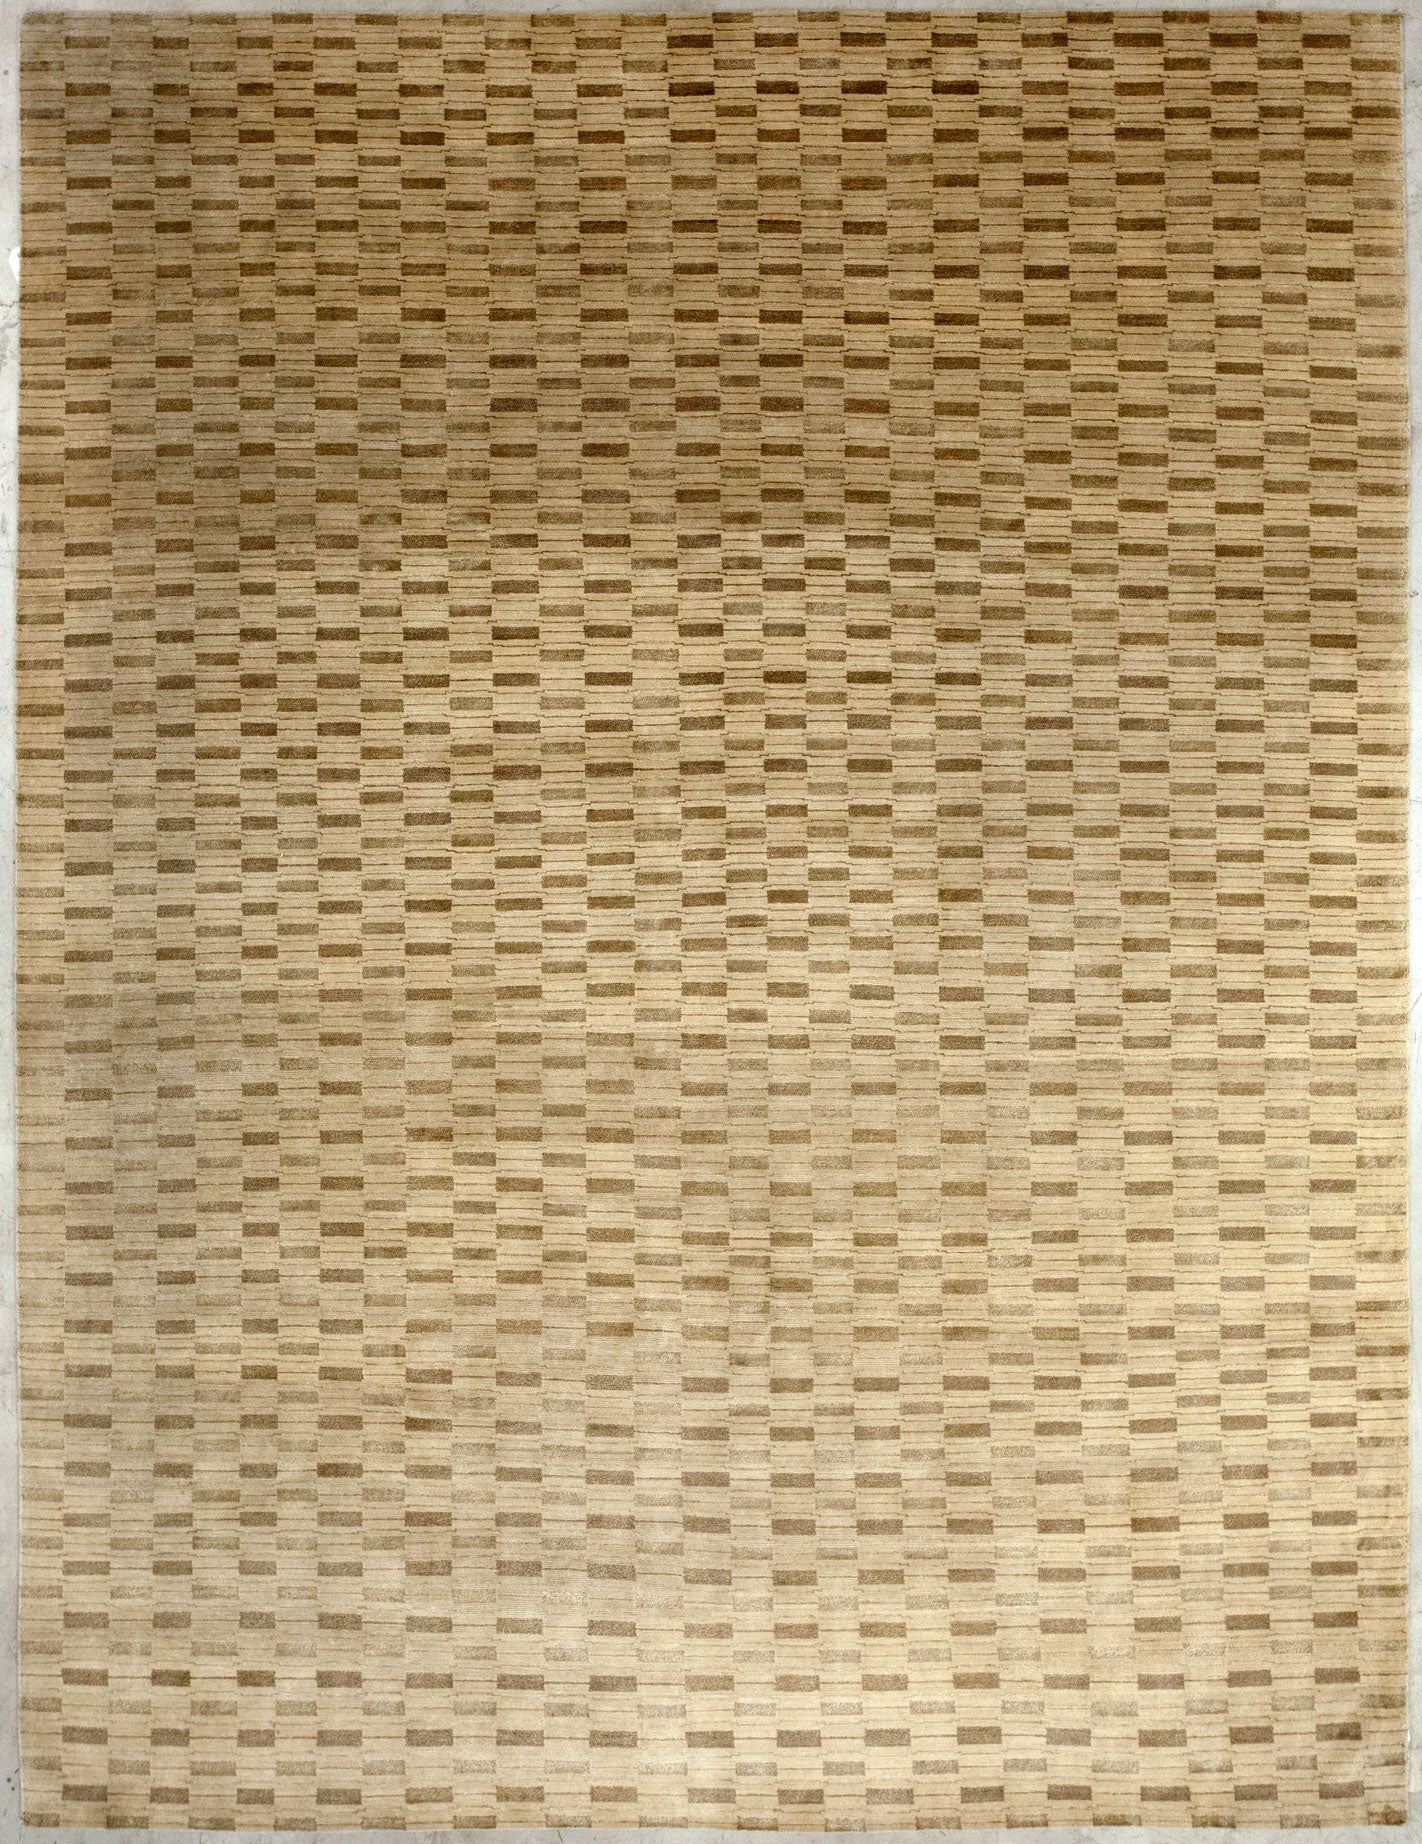 Contemporary rug comes with golden background.